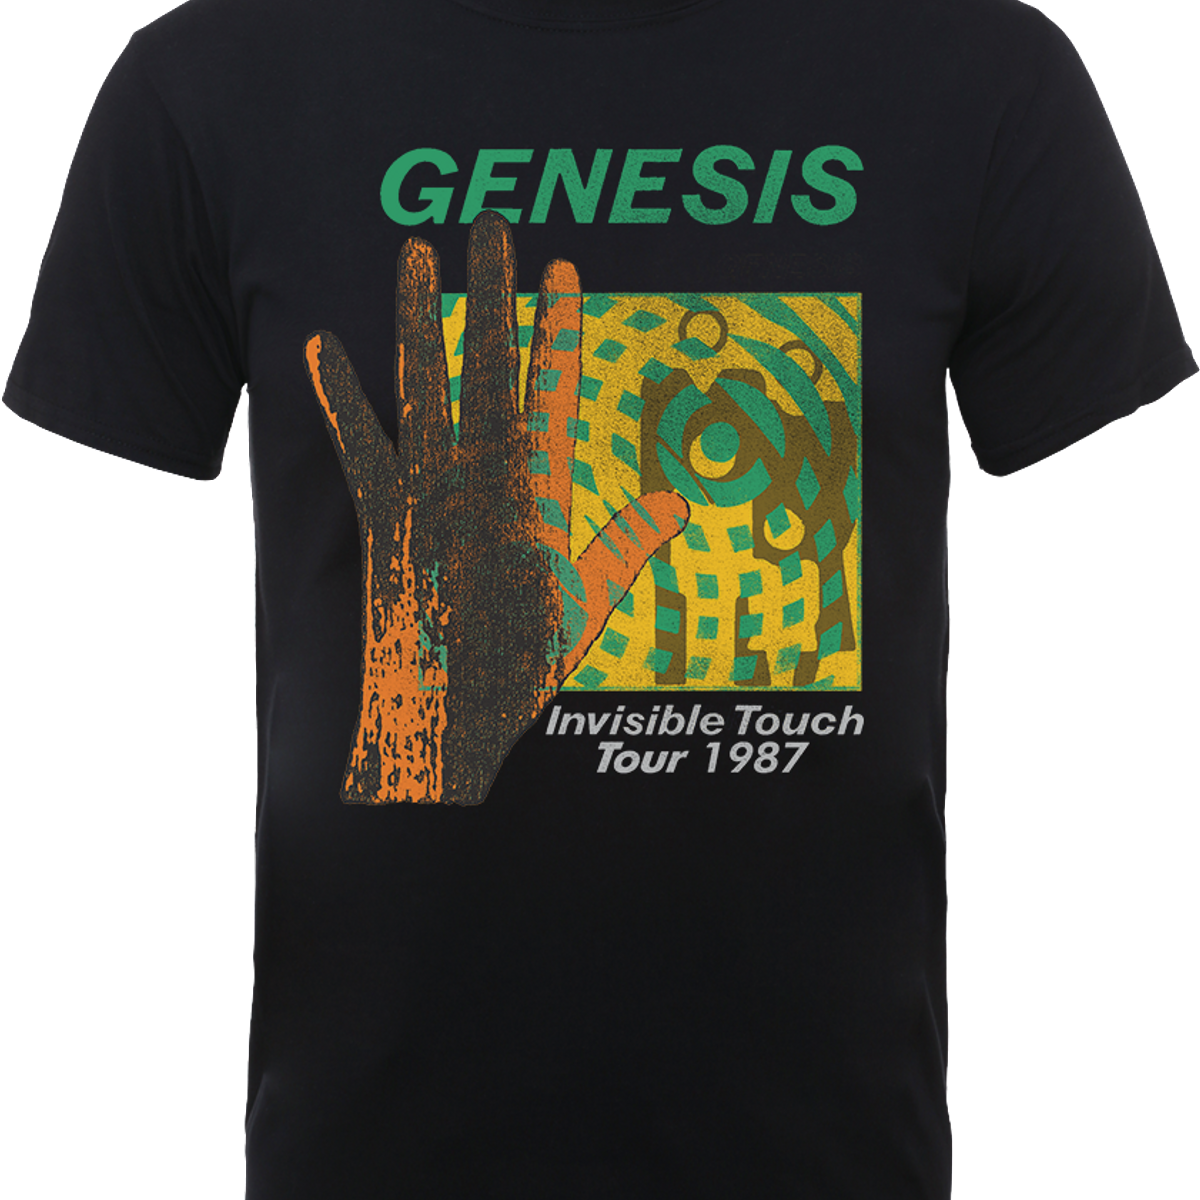 Genesis Invisible Touch Tour 1987 T Shirt - Genesis